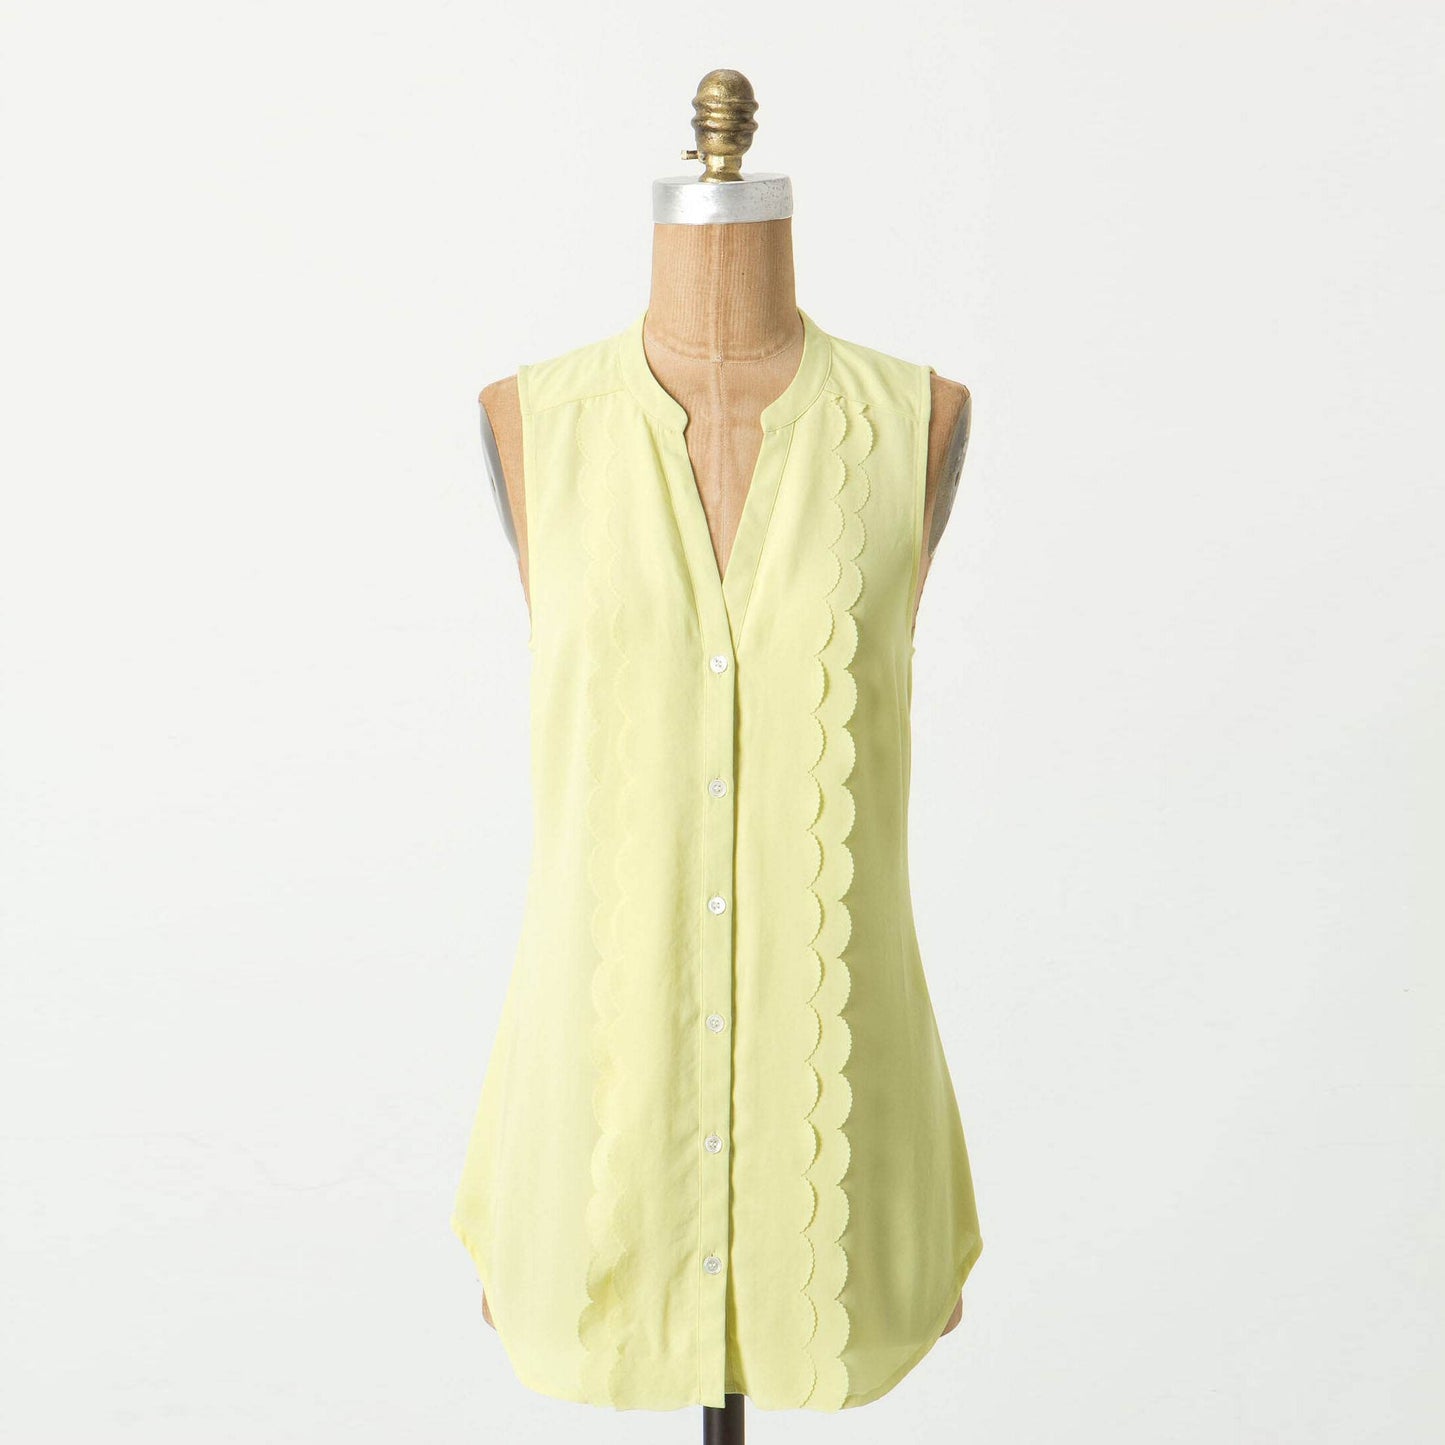 Meadow Rue sleeveless scallop blouse - size 6